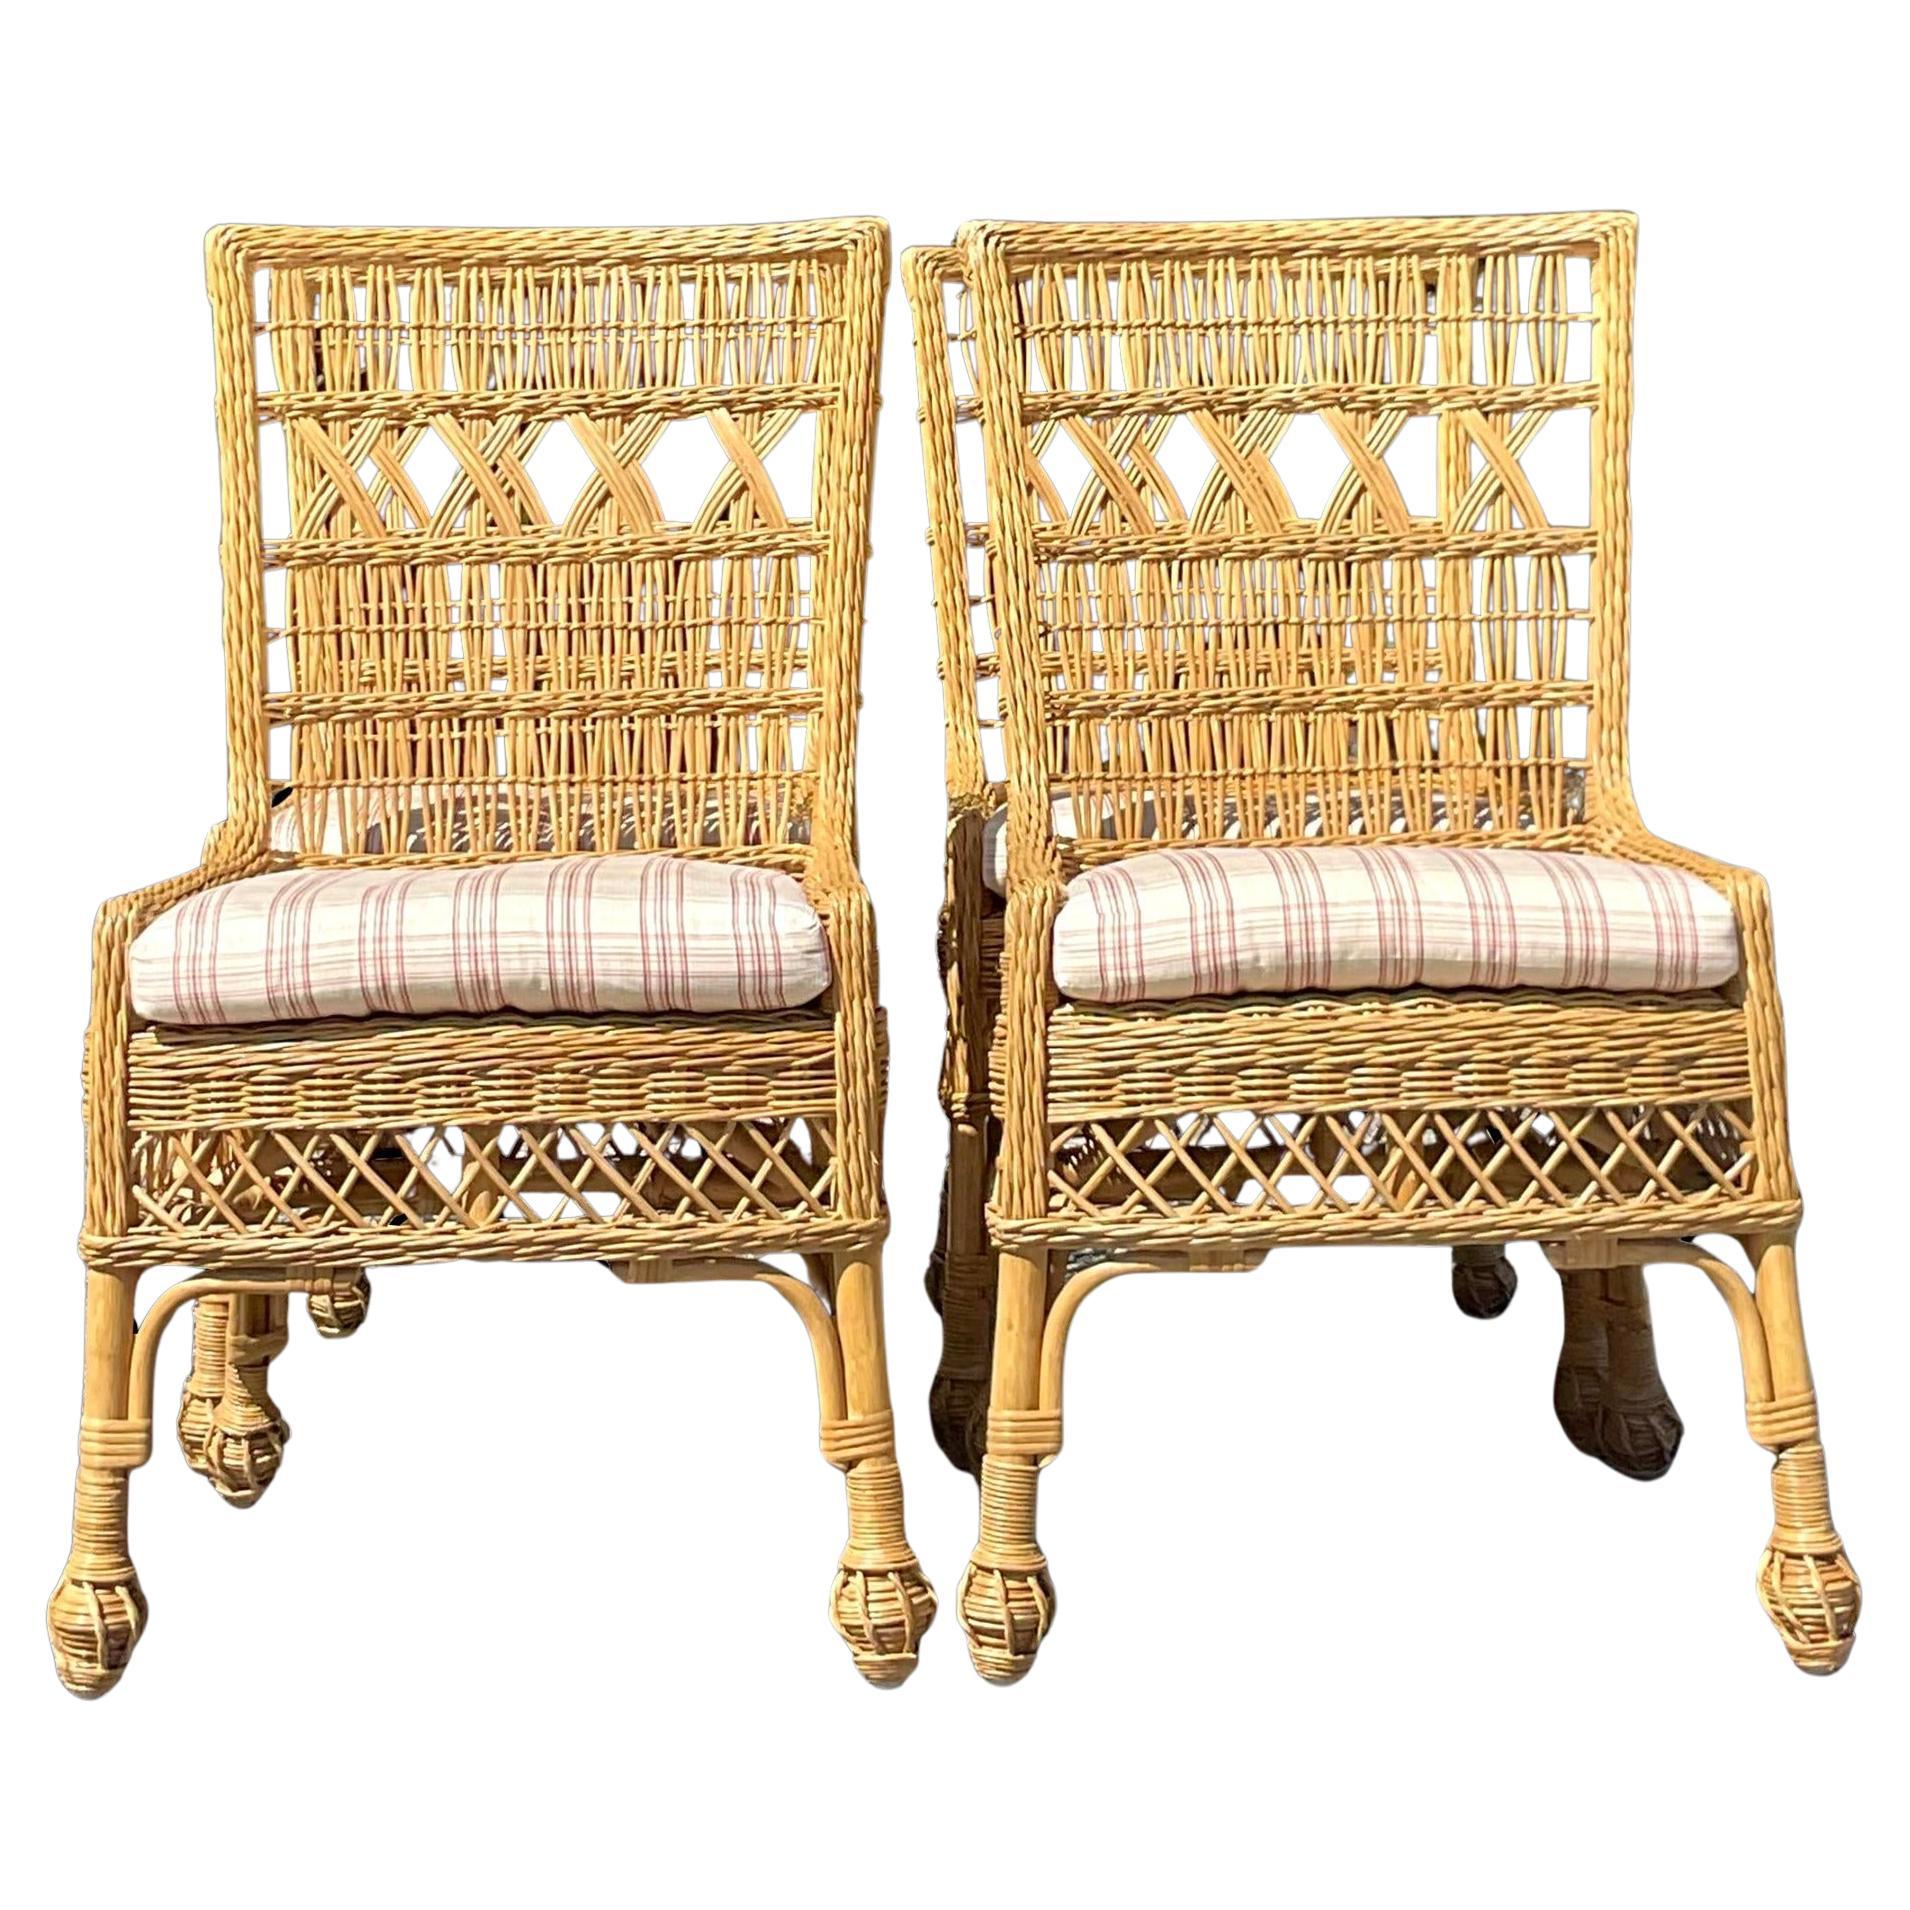 Vintage Coastal Woven Rattan Dining Chairs - Set of 4 For Sale